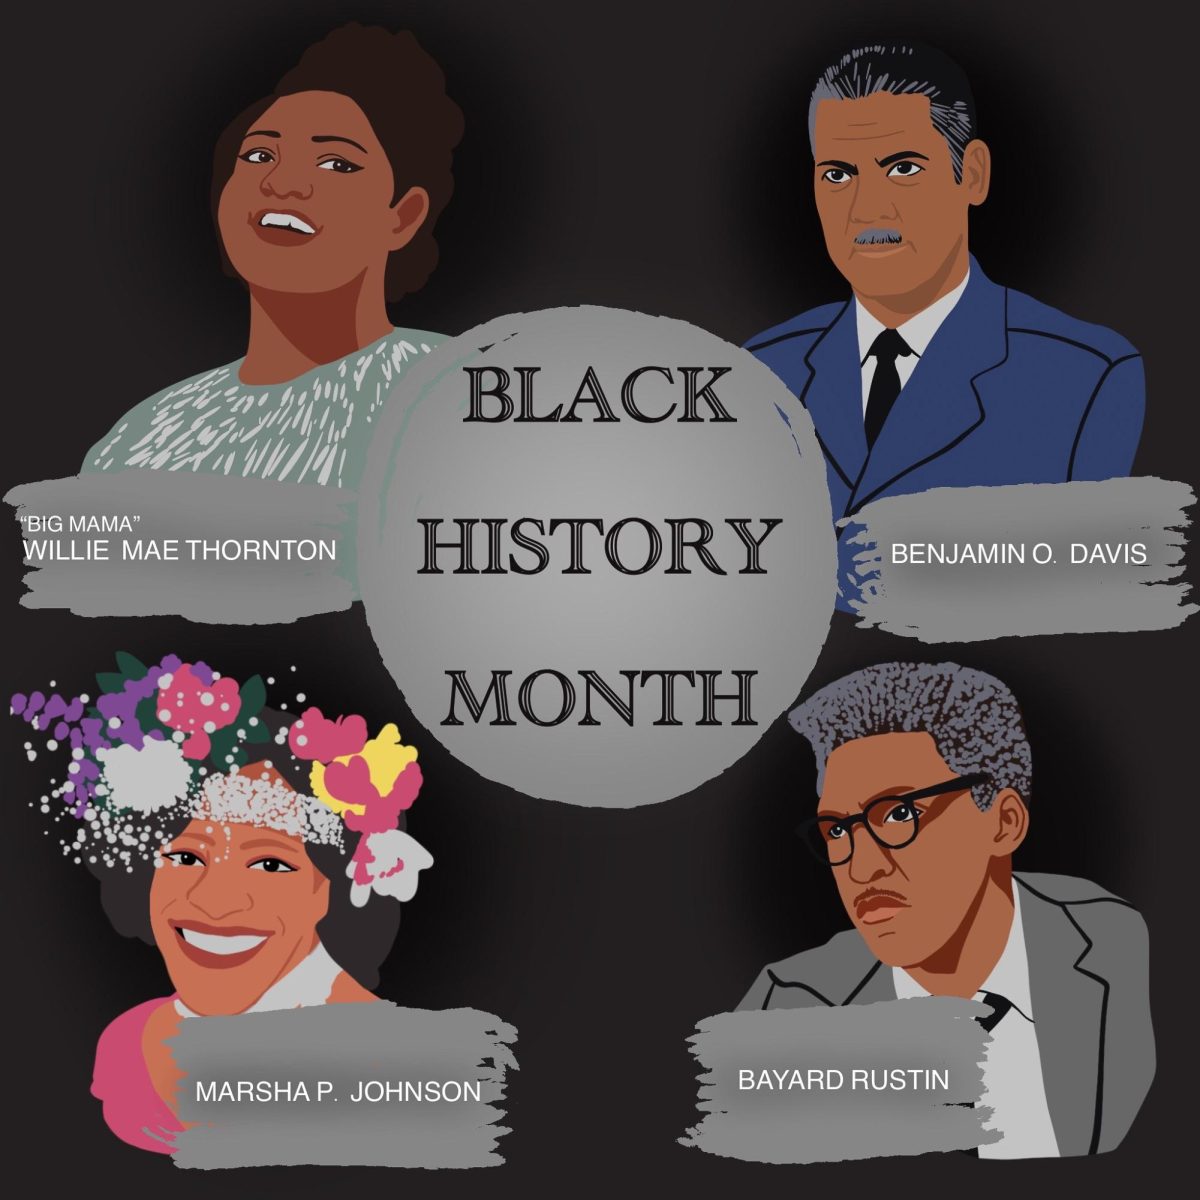 February is Black History Month and were honoring four Black Americans who have made a great impact in the countrys history. Willie Mae Thornton, an influential R&B singer and song writer, Benjamin O. Davis Jr., the first Black brigadier general in the United States Air Force, Marsha P. Johnson, a gay liberation and AIDS activist, and Bayard Rustin, a politcal activist for civil and gay rights.